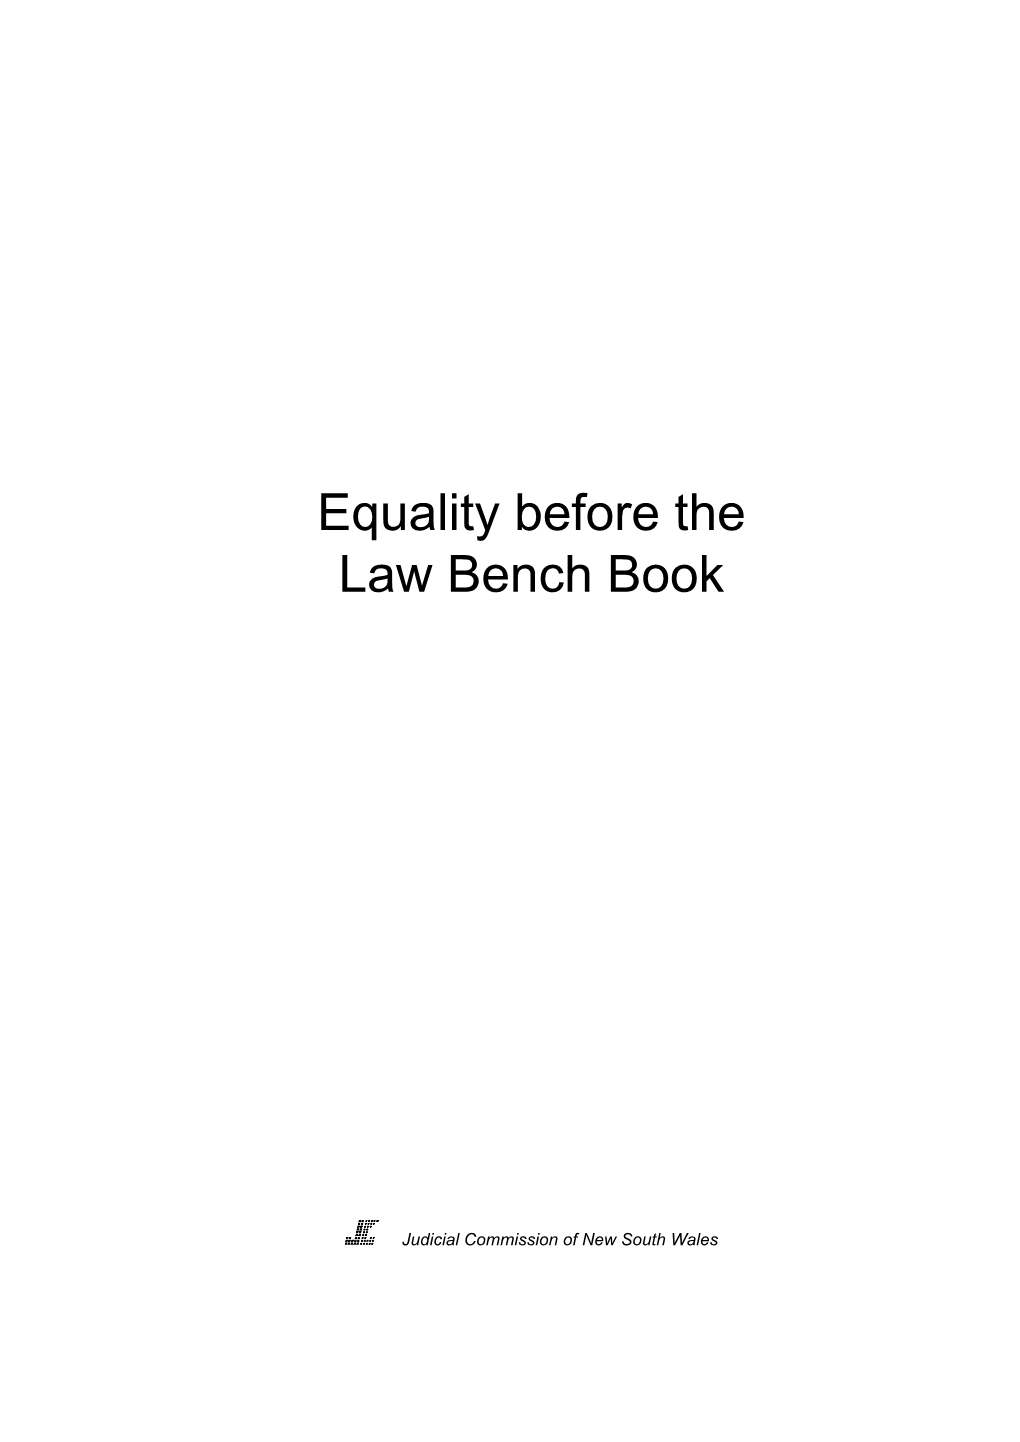 Equality Before the Law Bench Book